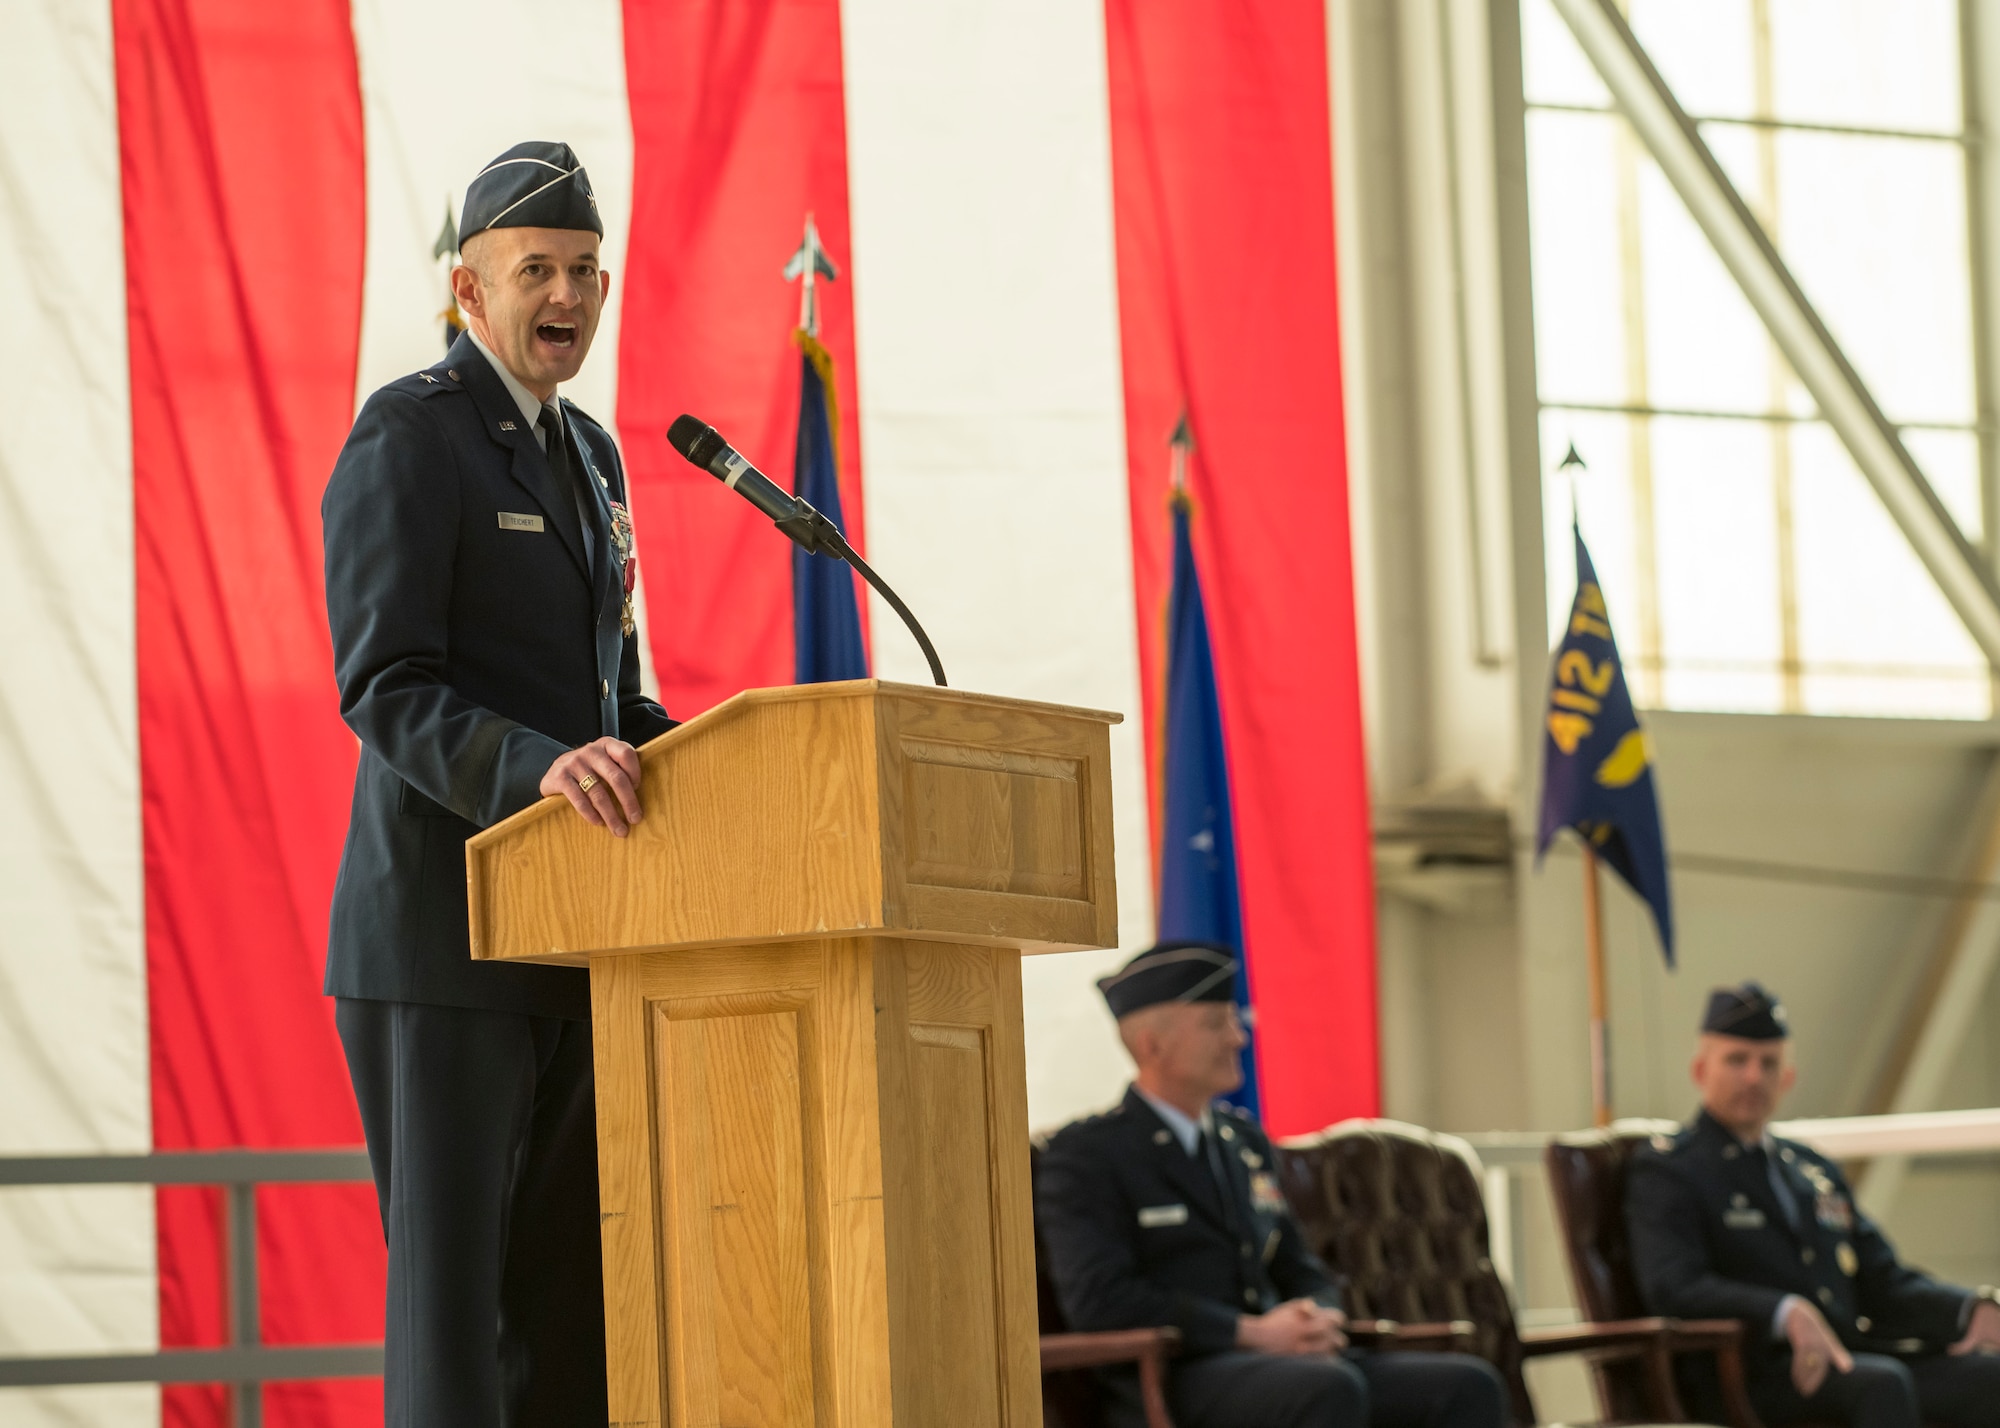 Brig. Gen. E. John Teichert, the outgoing 412th Test Wing Commander, gives his remarks during the Wing’s Change of Command Ceremony at Edwards Air Force Base, California, Feb. 5. (Air Force photo by Giancarlo Casem)